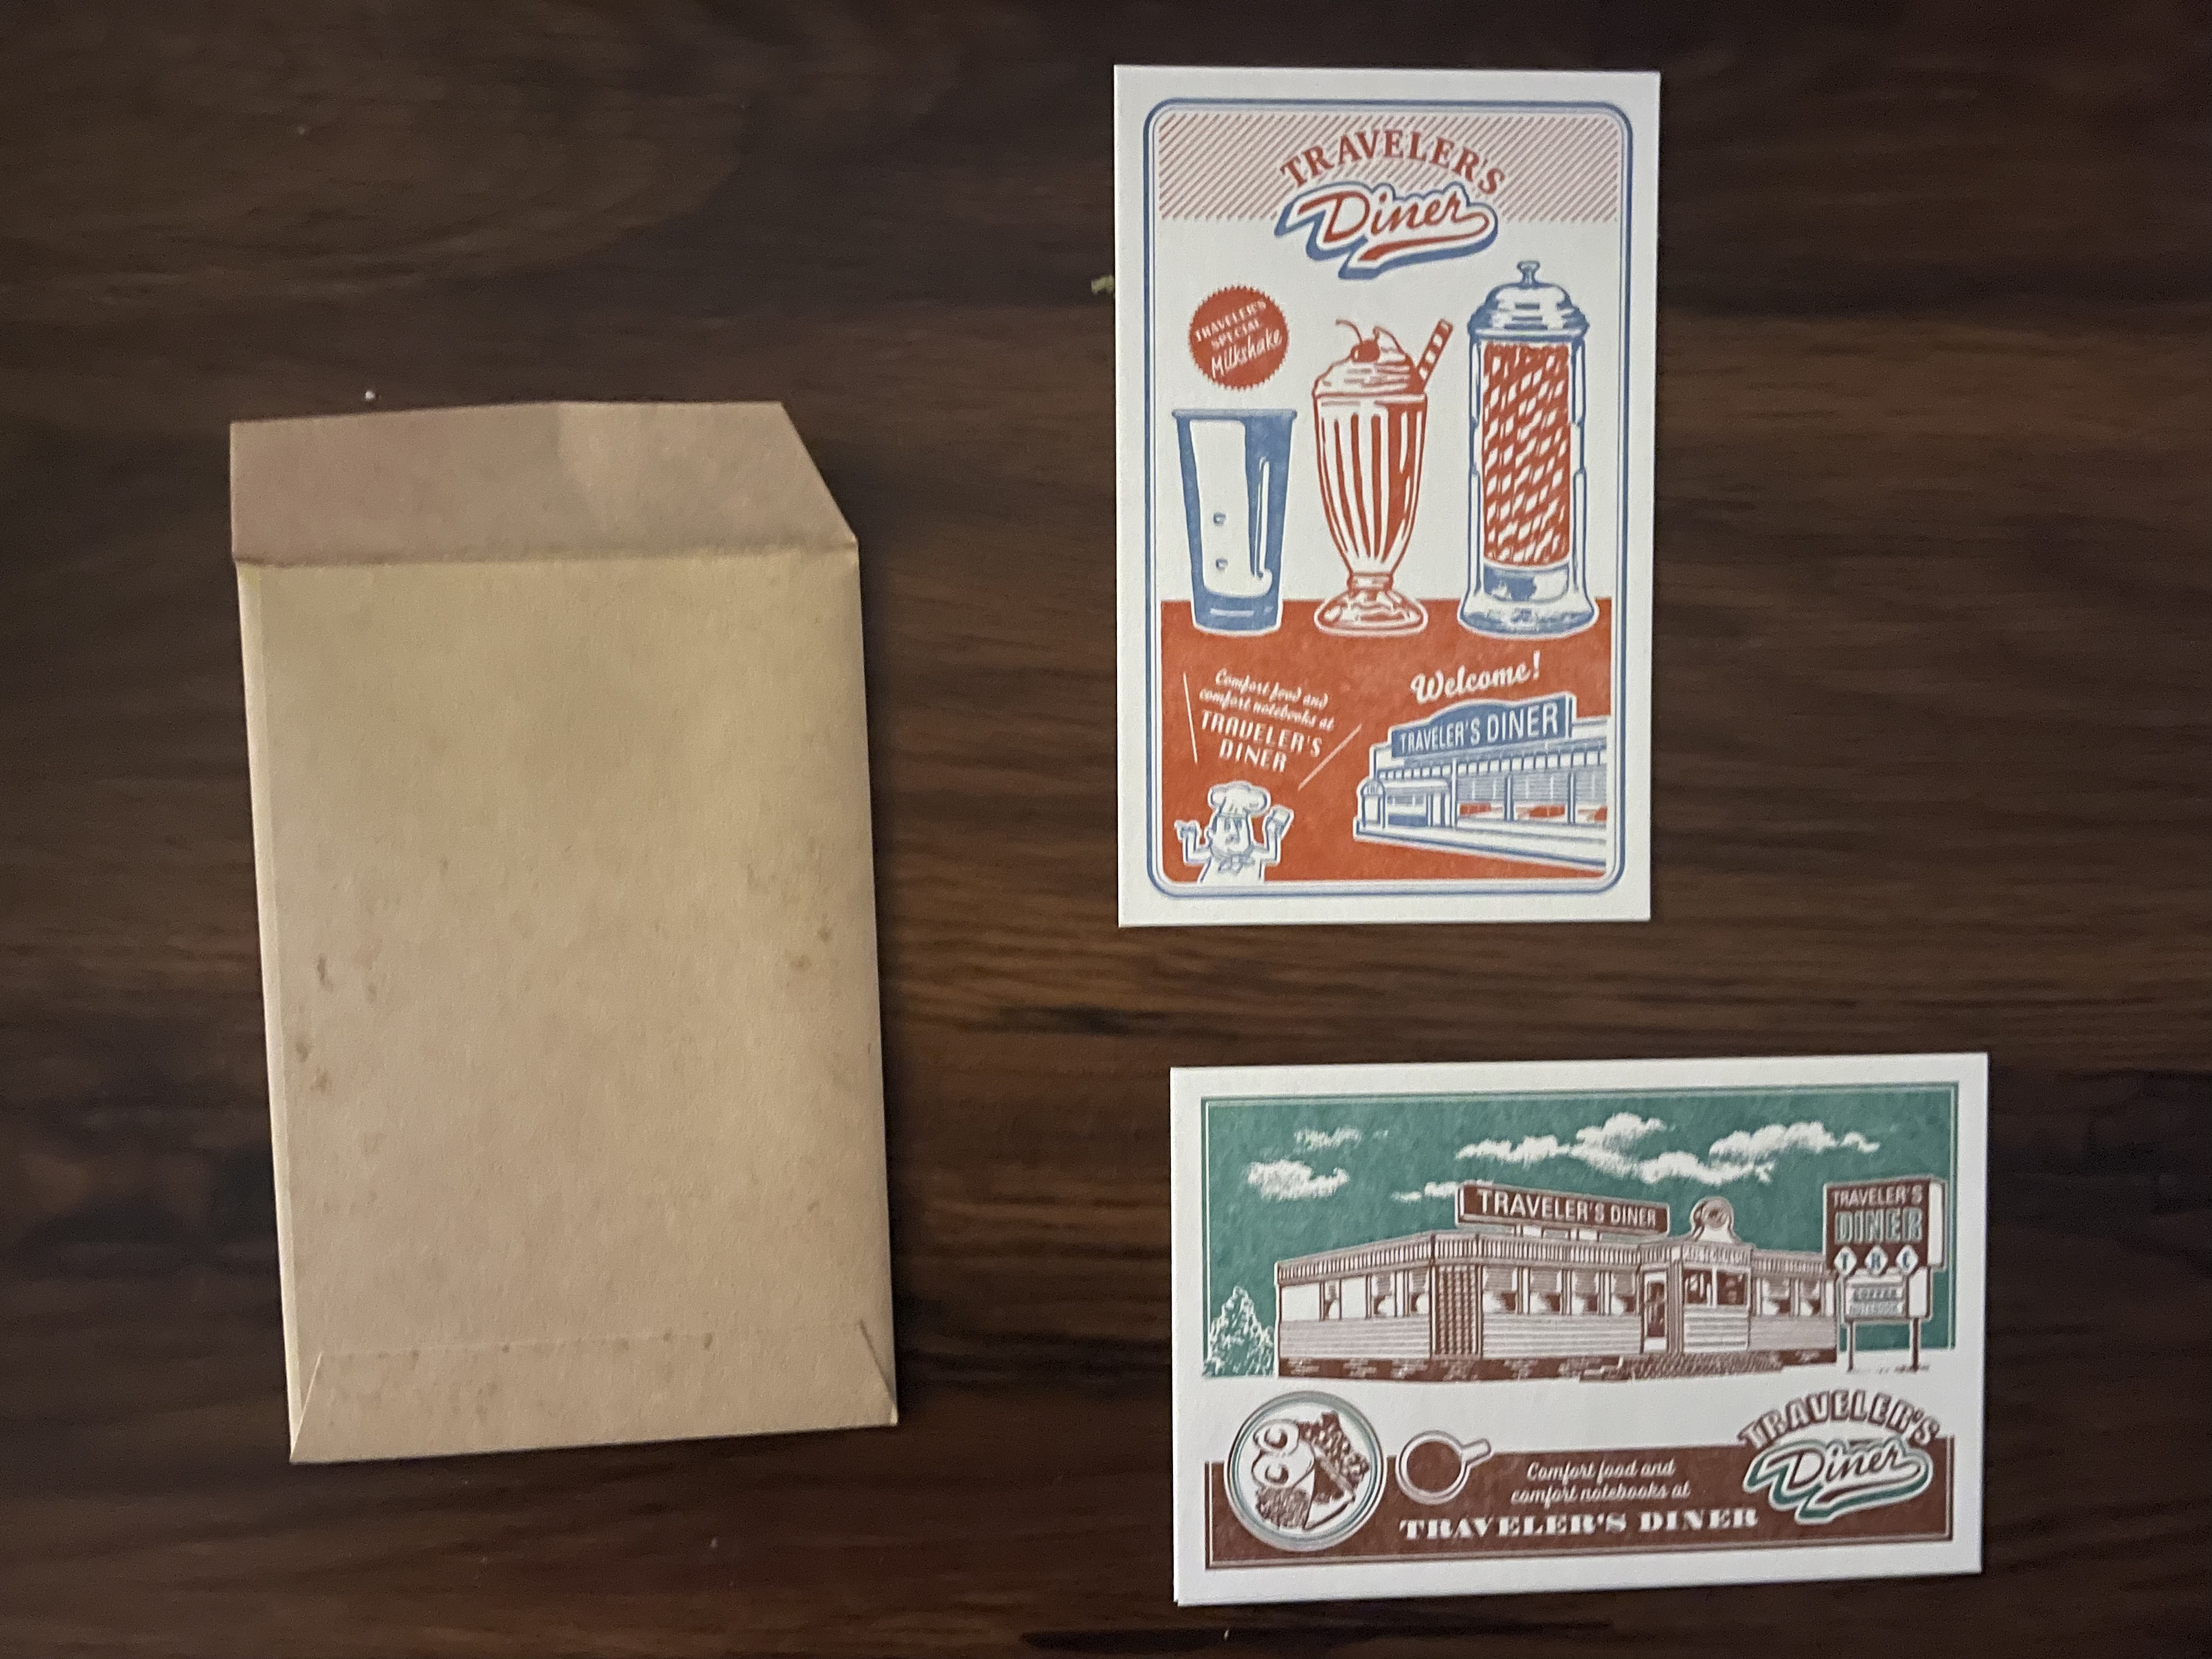 a kraft envelope and two postcards of retro diner images: one has art of a milkshake and its shaker while the other is art of a classic train car diner